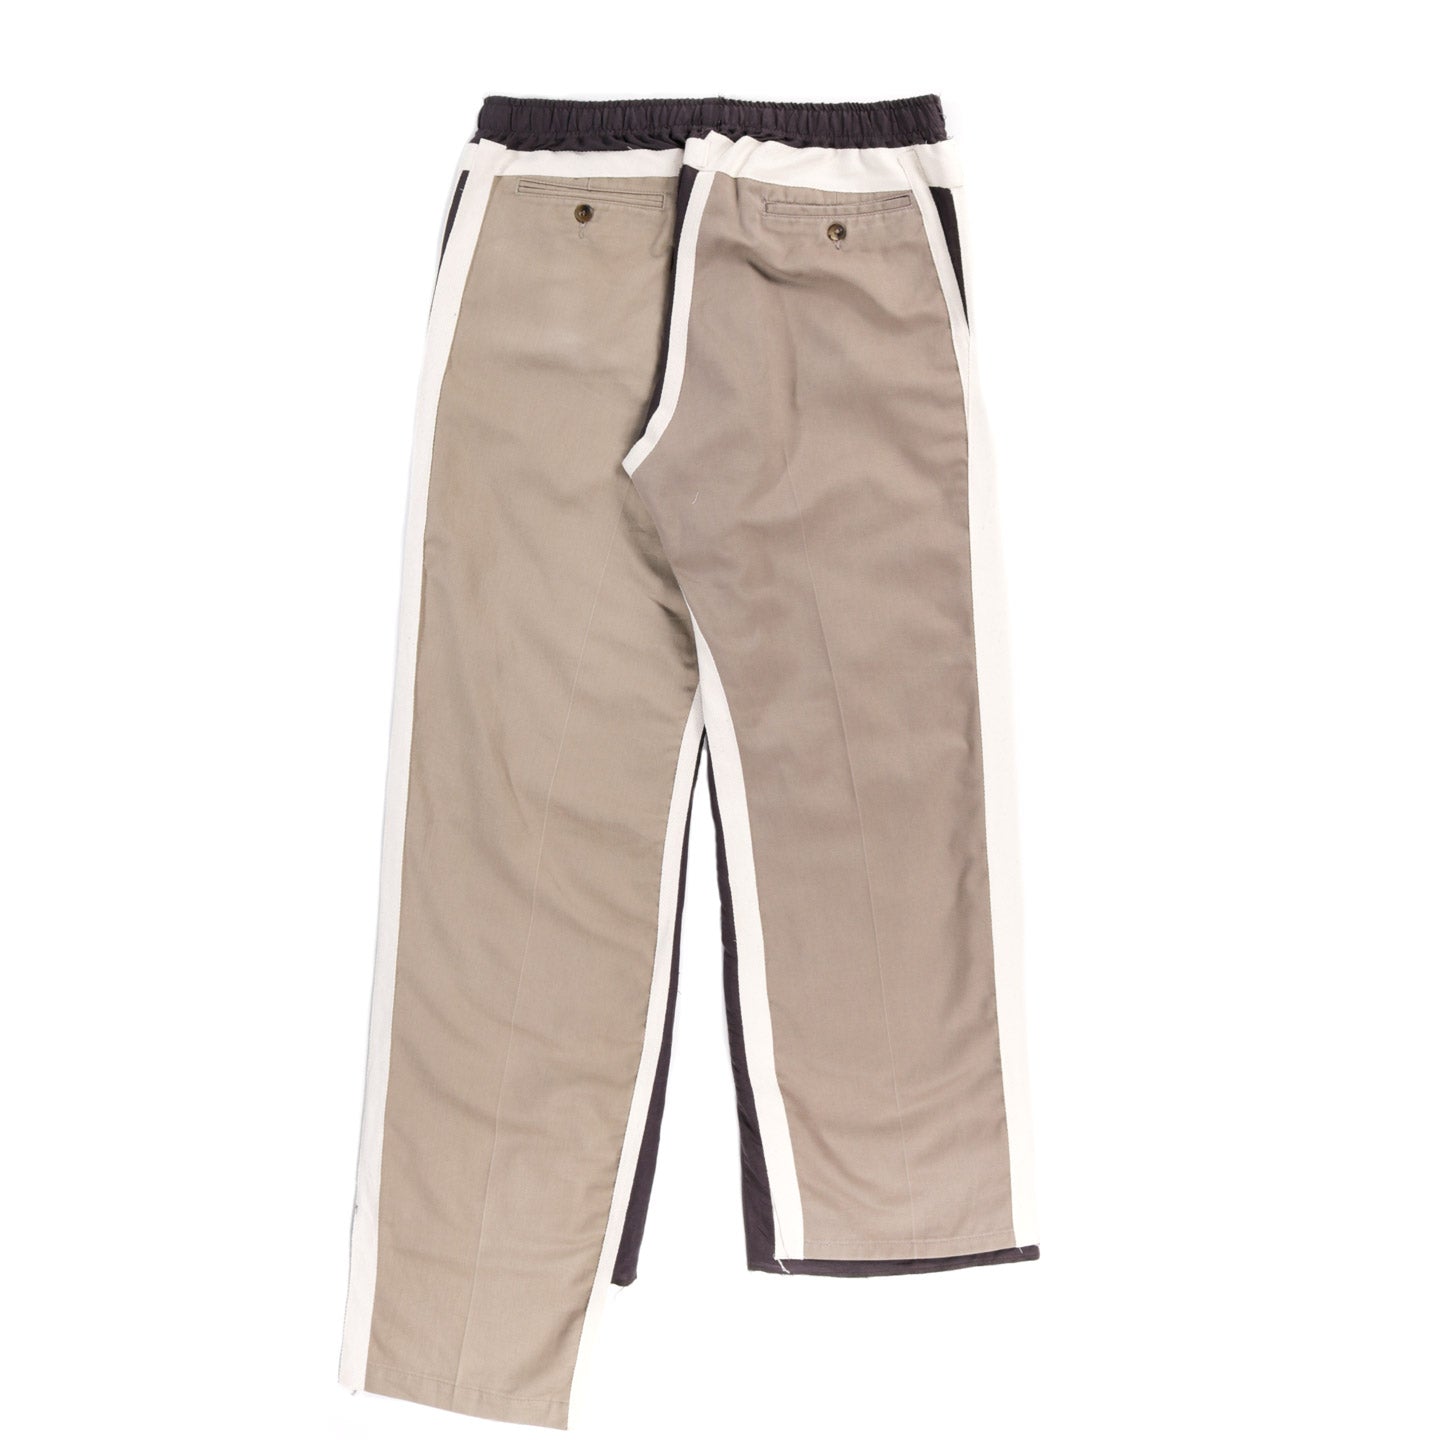 REBUILD BY NEEDLES CHINO COVERED PANT CHARCOAL - M (B)